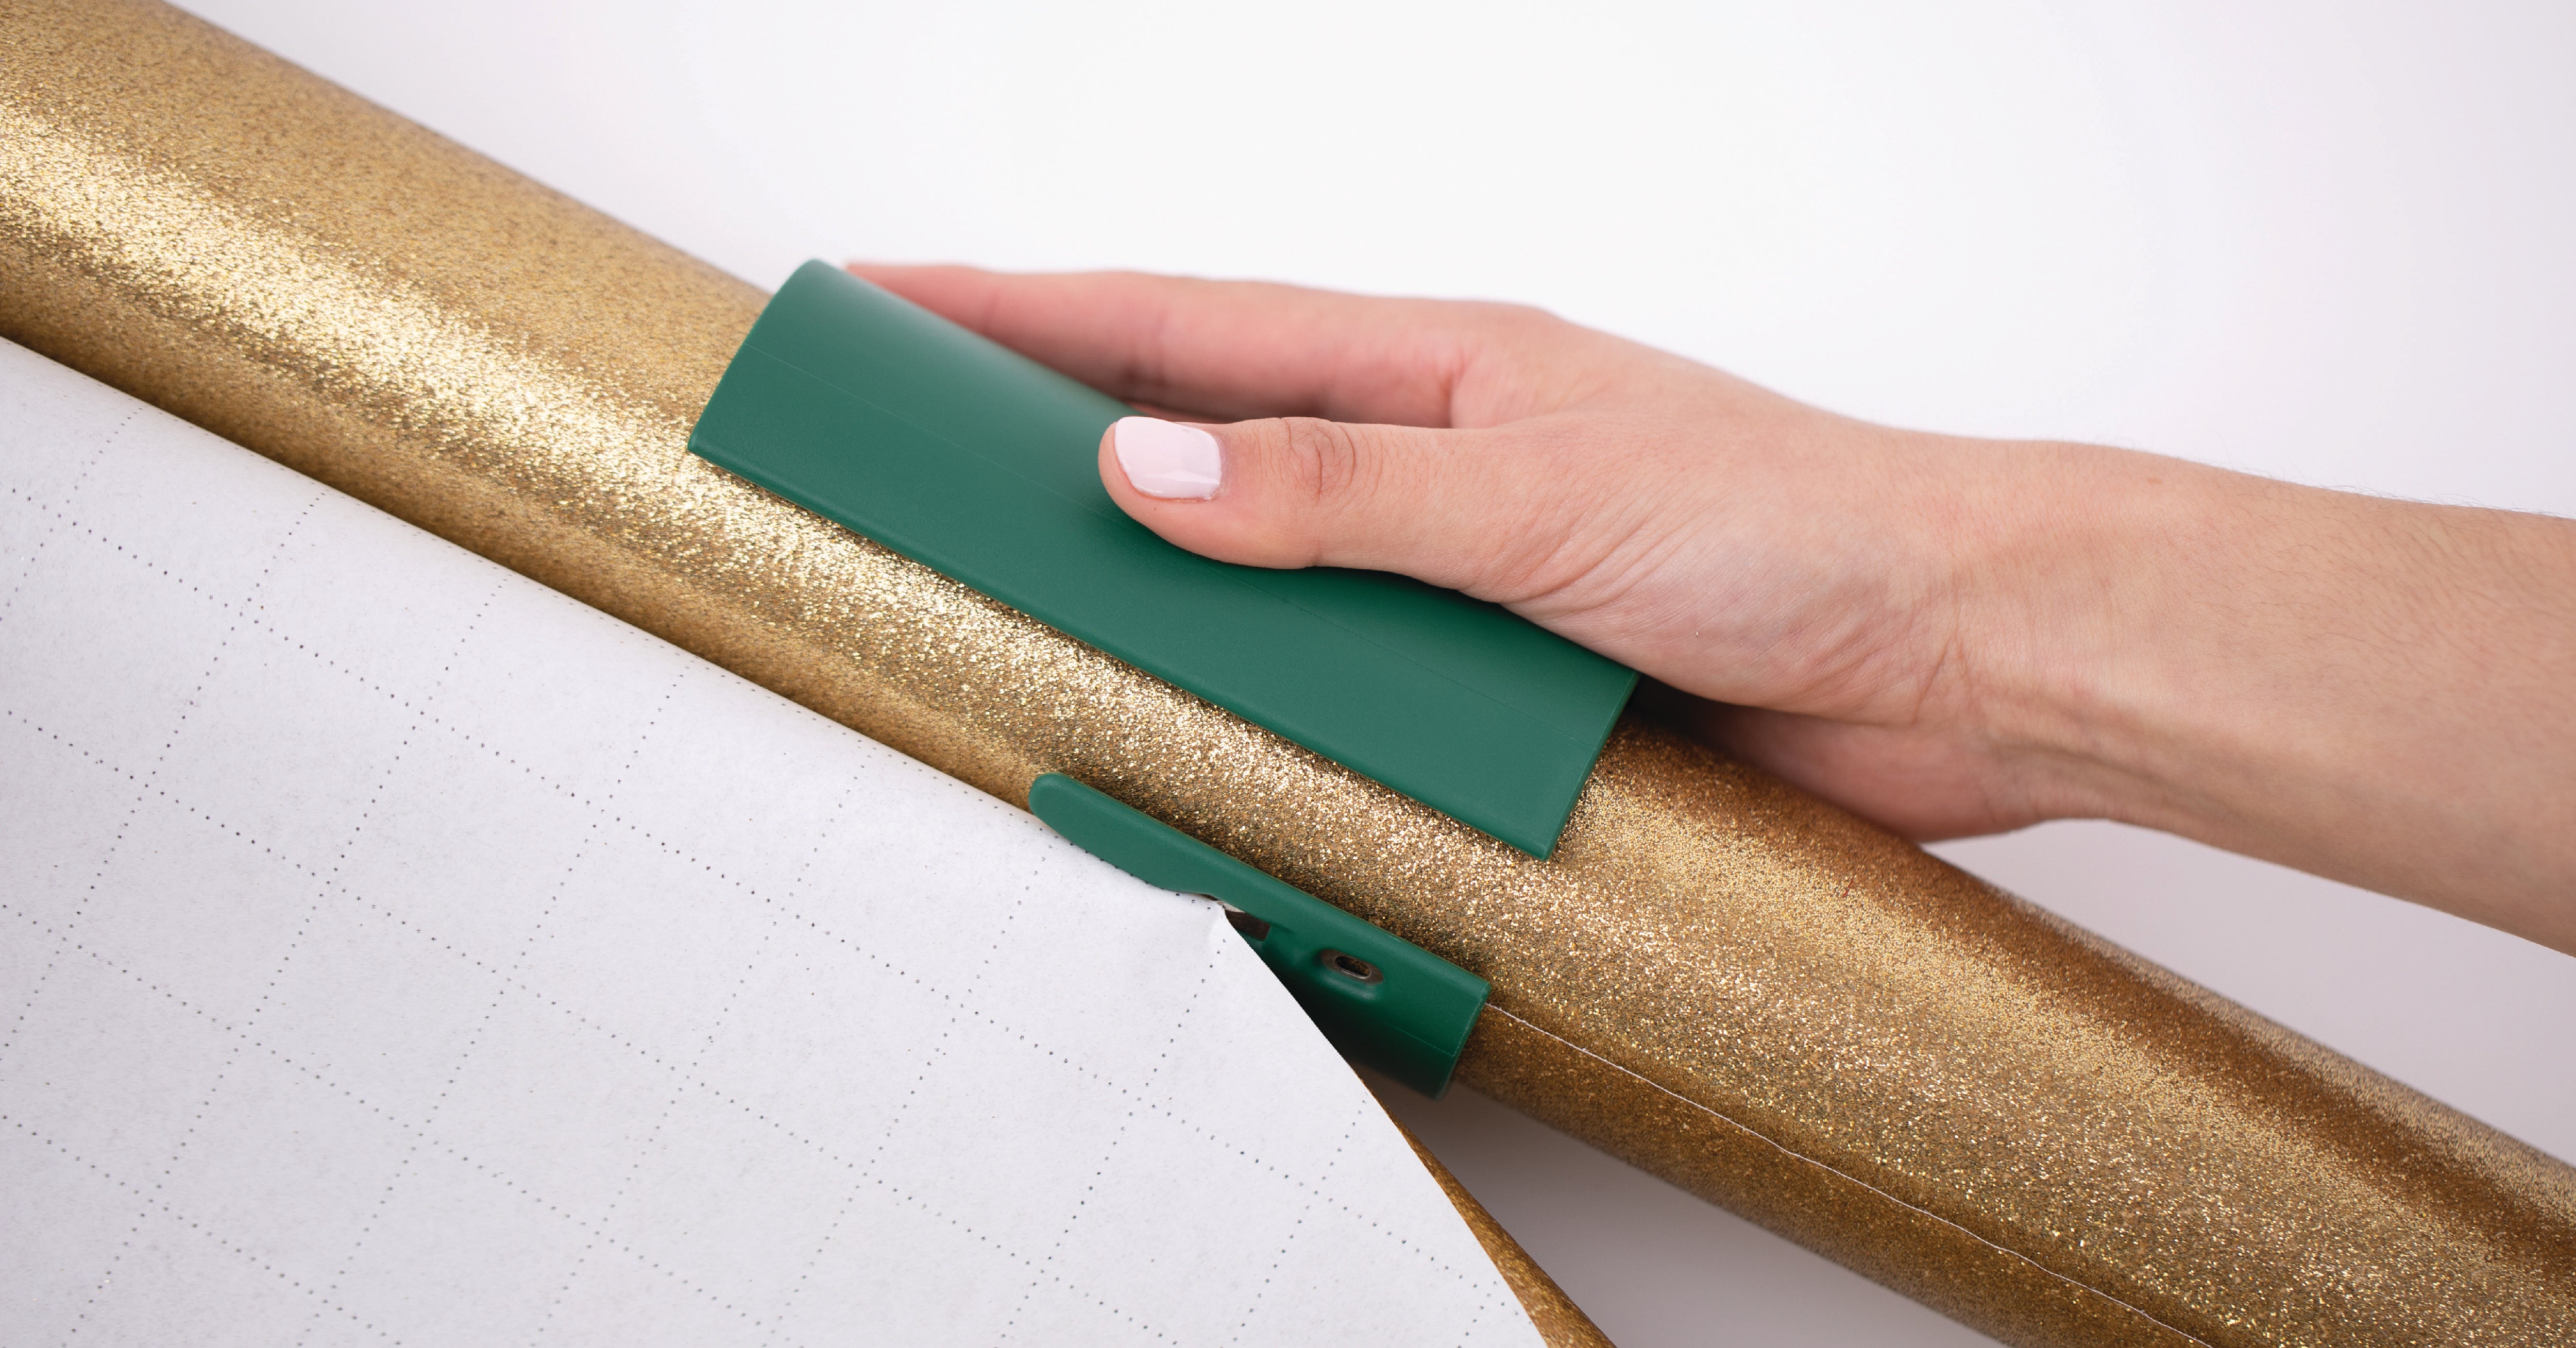 Little ELF—Cutting Wrapping Paper Made Easy and Fun by Bryan Perla —  Kickstarter